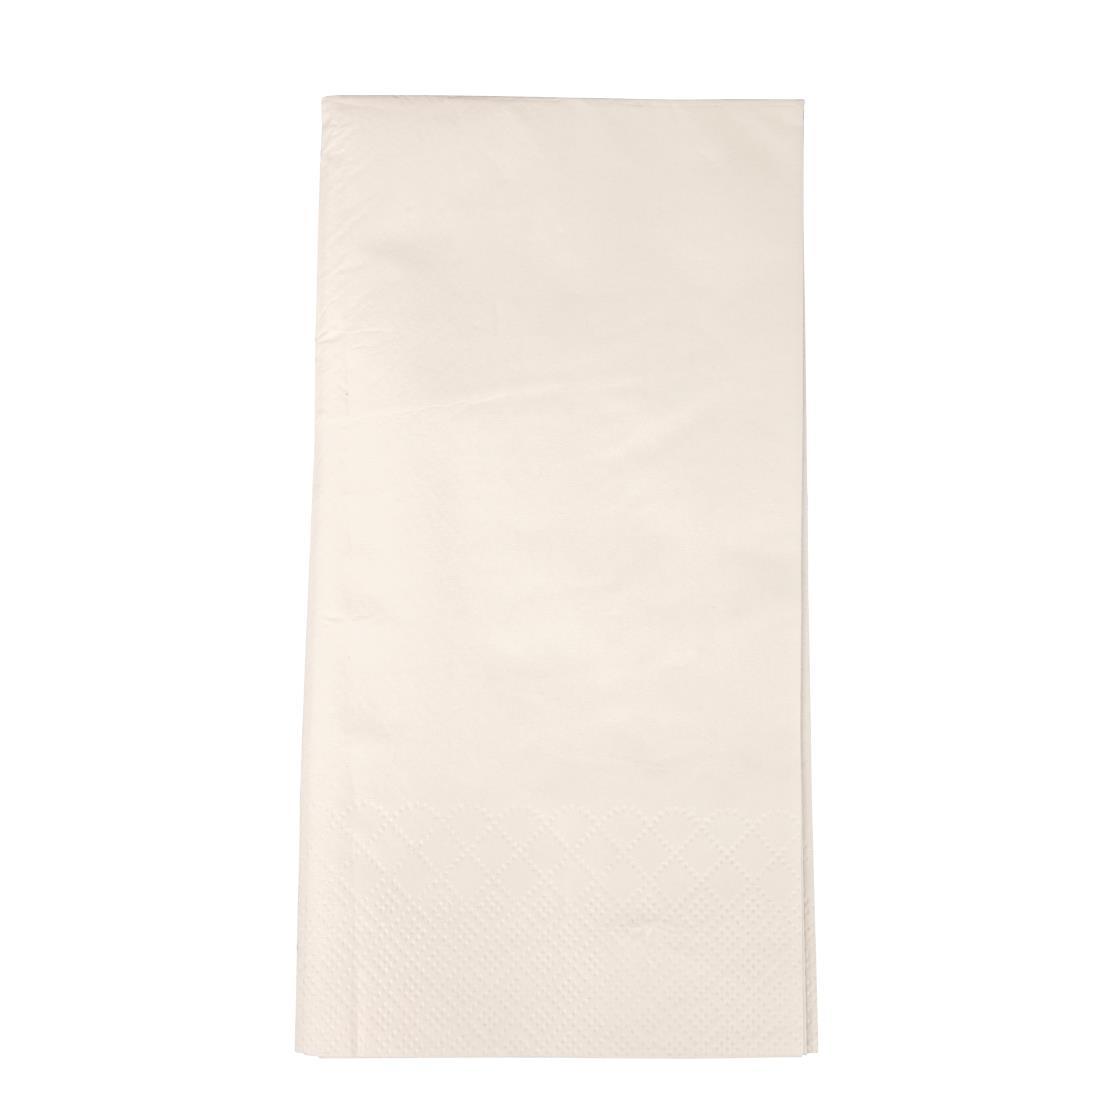 Fiesta Recyclable Dinner Napkin White 40x40cm 2ply 1/8 Fold (Pack of 250) - CM565  - 2